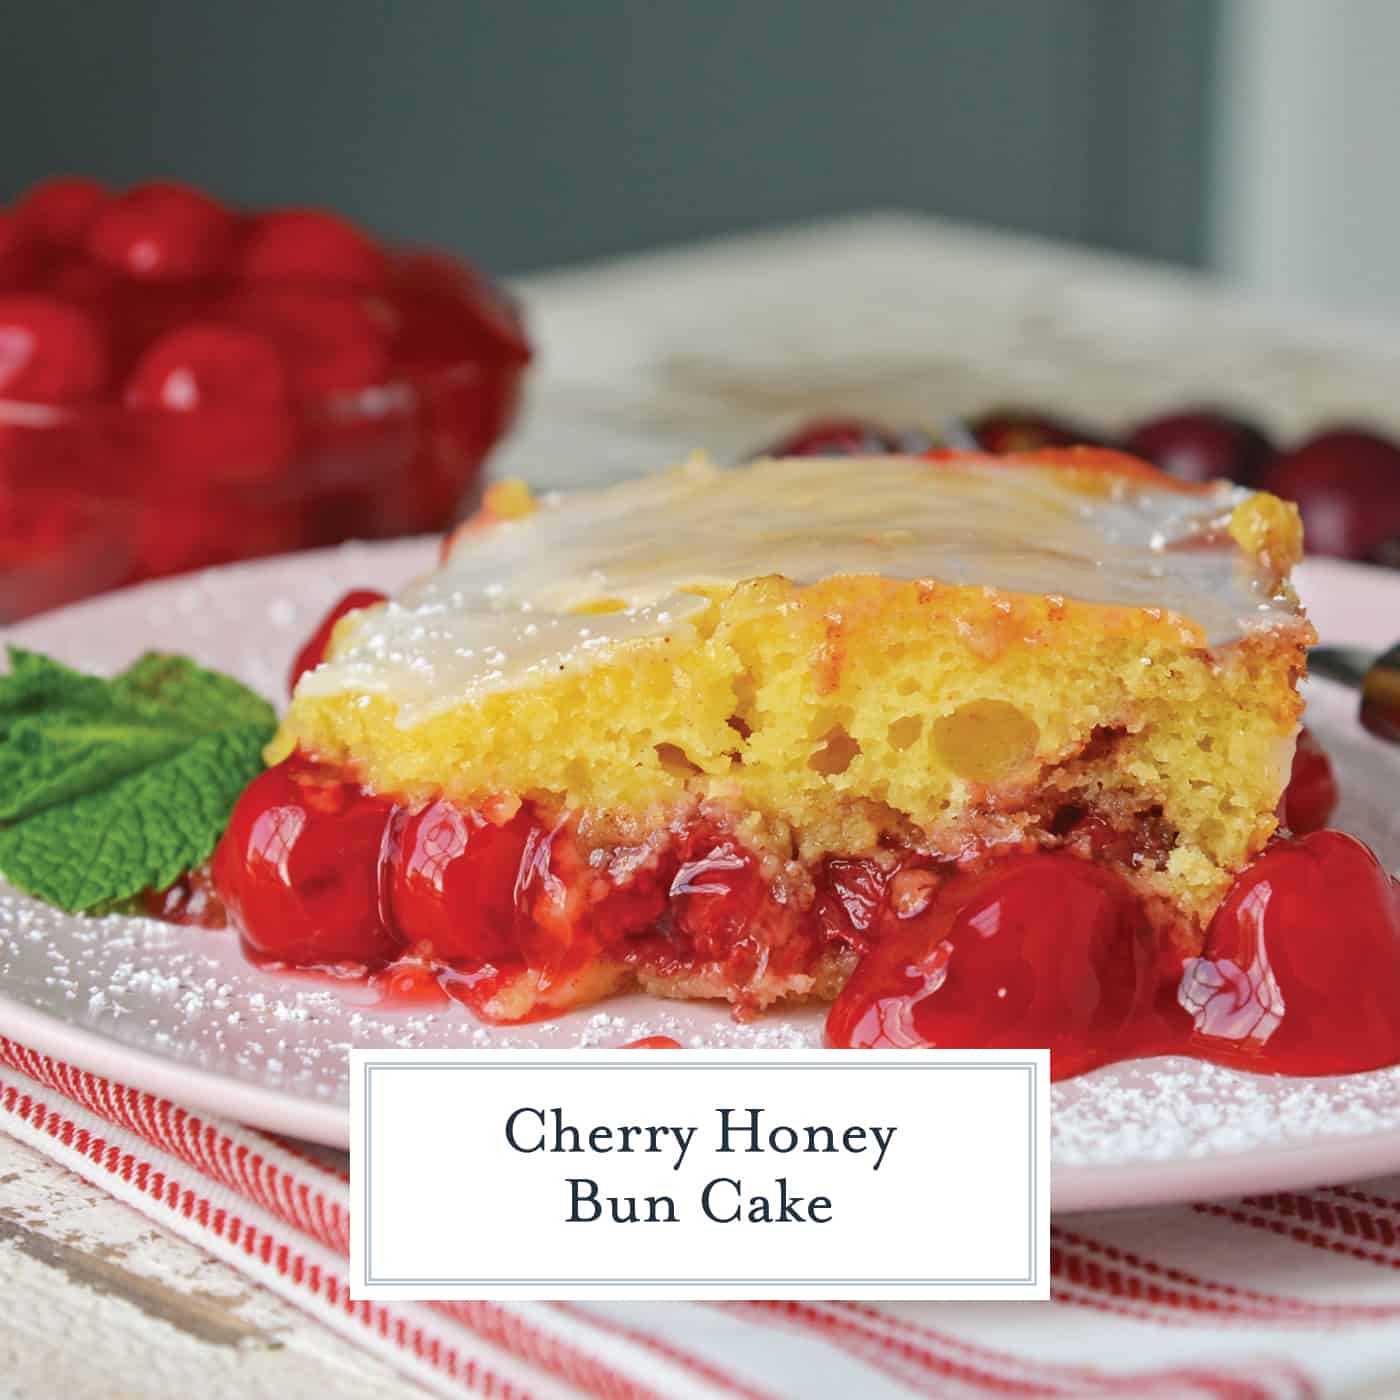 What is better than a Honey Bun Cake? A CHERRY Honey Bun Cake! Yellow cake mix laced with cinnamon, brown sugar and cherry pie filling, drizzled with almond glaze. #honeybuncake www.savoryexperiments.com